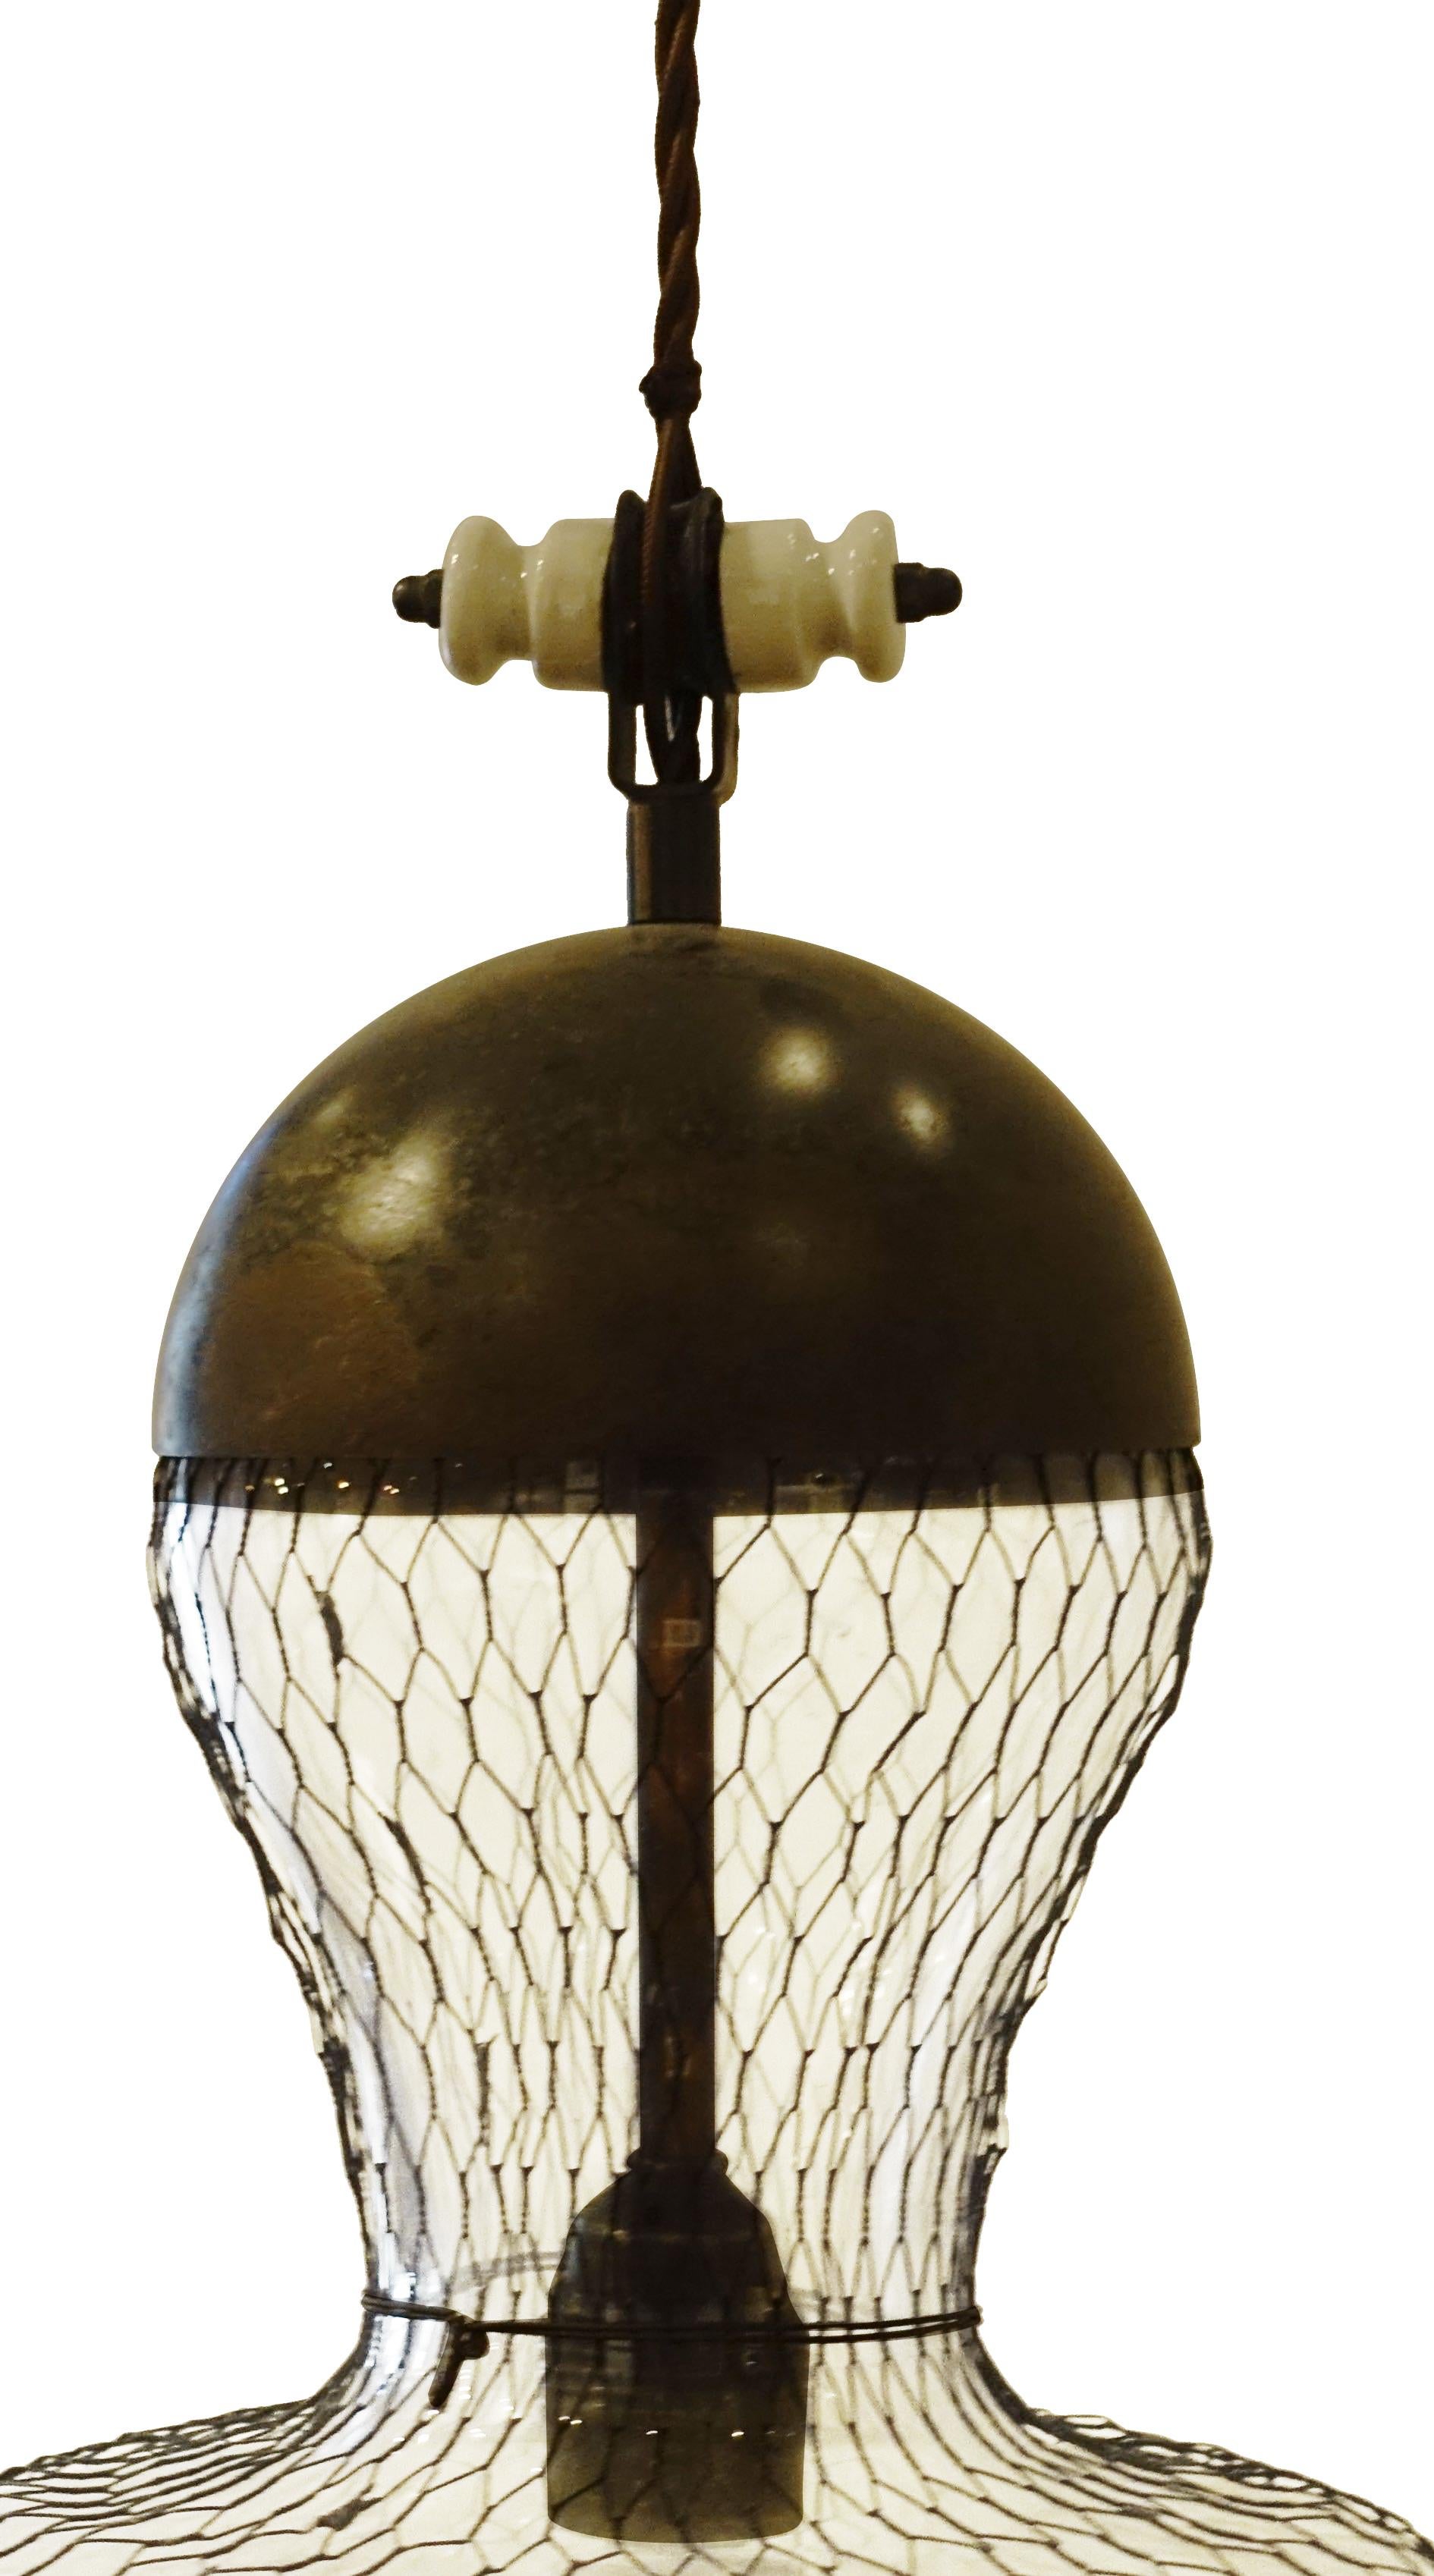 Hour glass shaped glass covered in metal mesh with weathered metal bottom edge and top cap.
Vintage white porcelain decorative detail.
Braided brown silk cord can be shortened to adjust height.
Cap included.
100 watt maximum.
Fixture height is